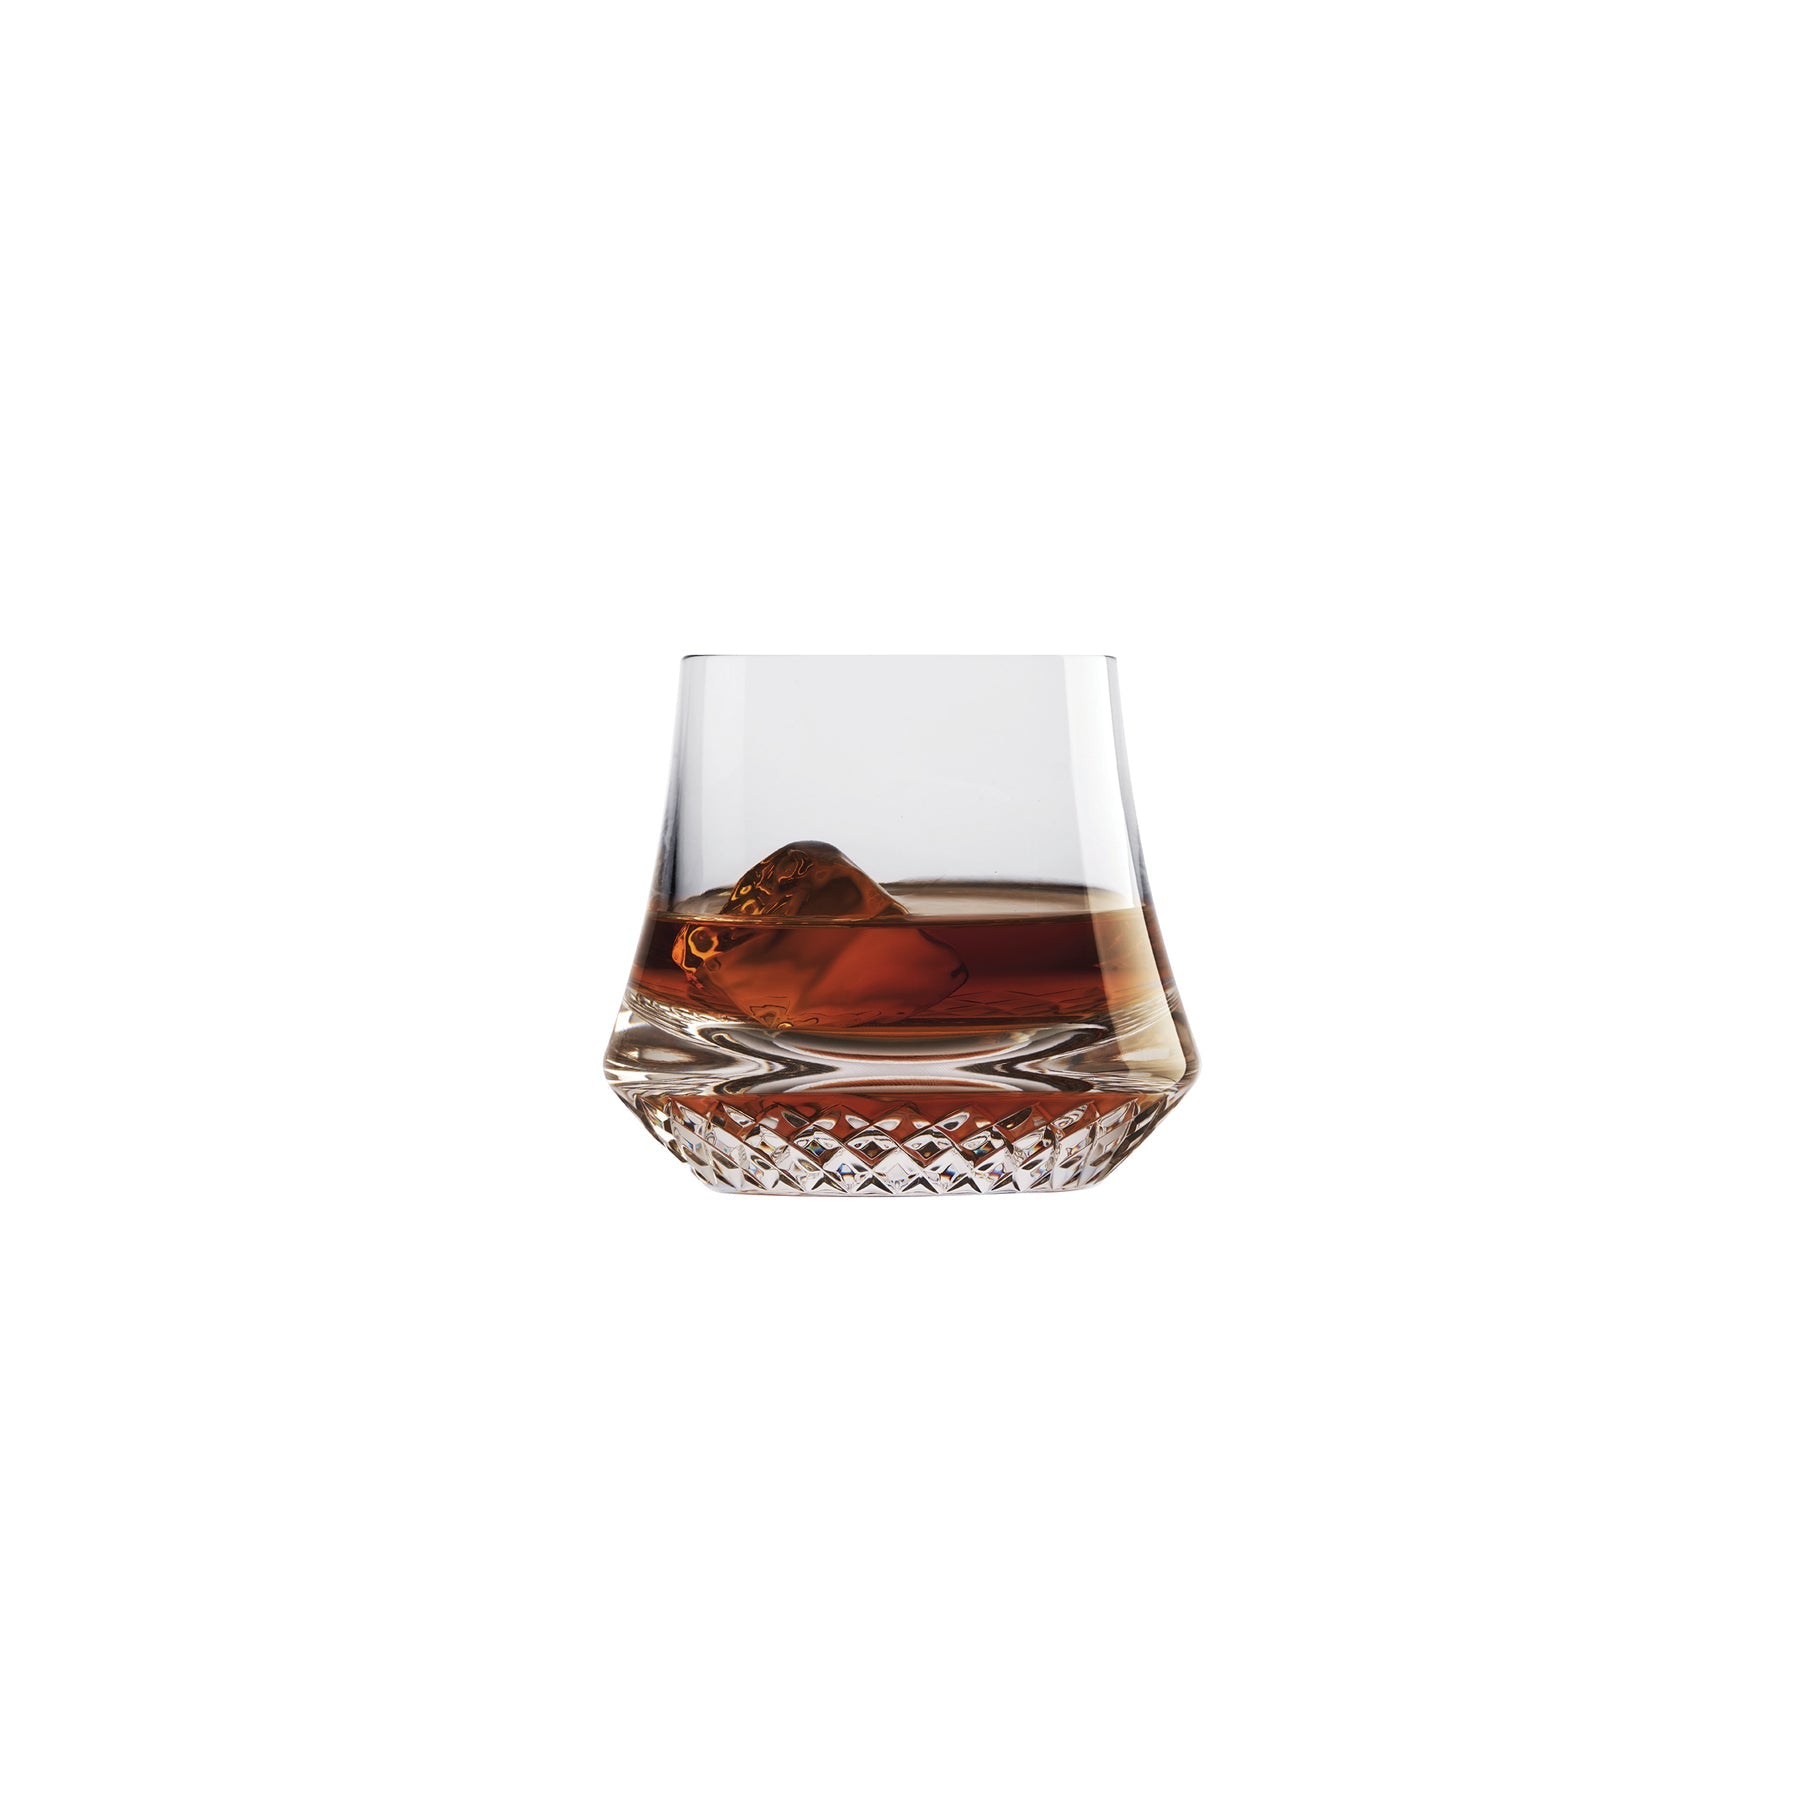 NUDE Paris whisky glass DOF, presented filled with whisky on a white background